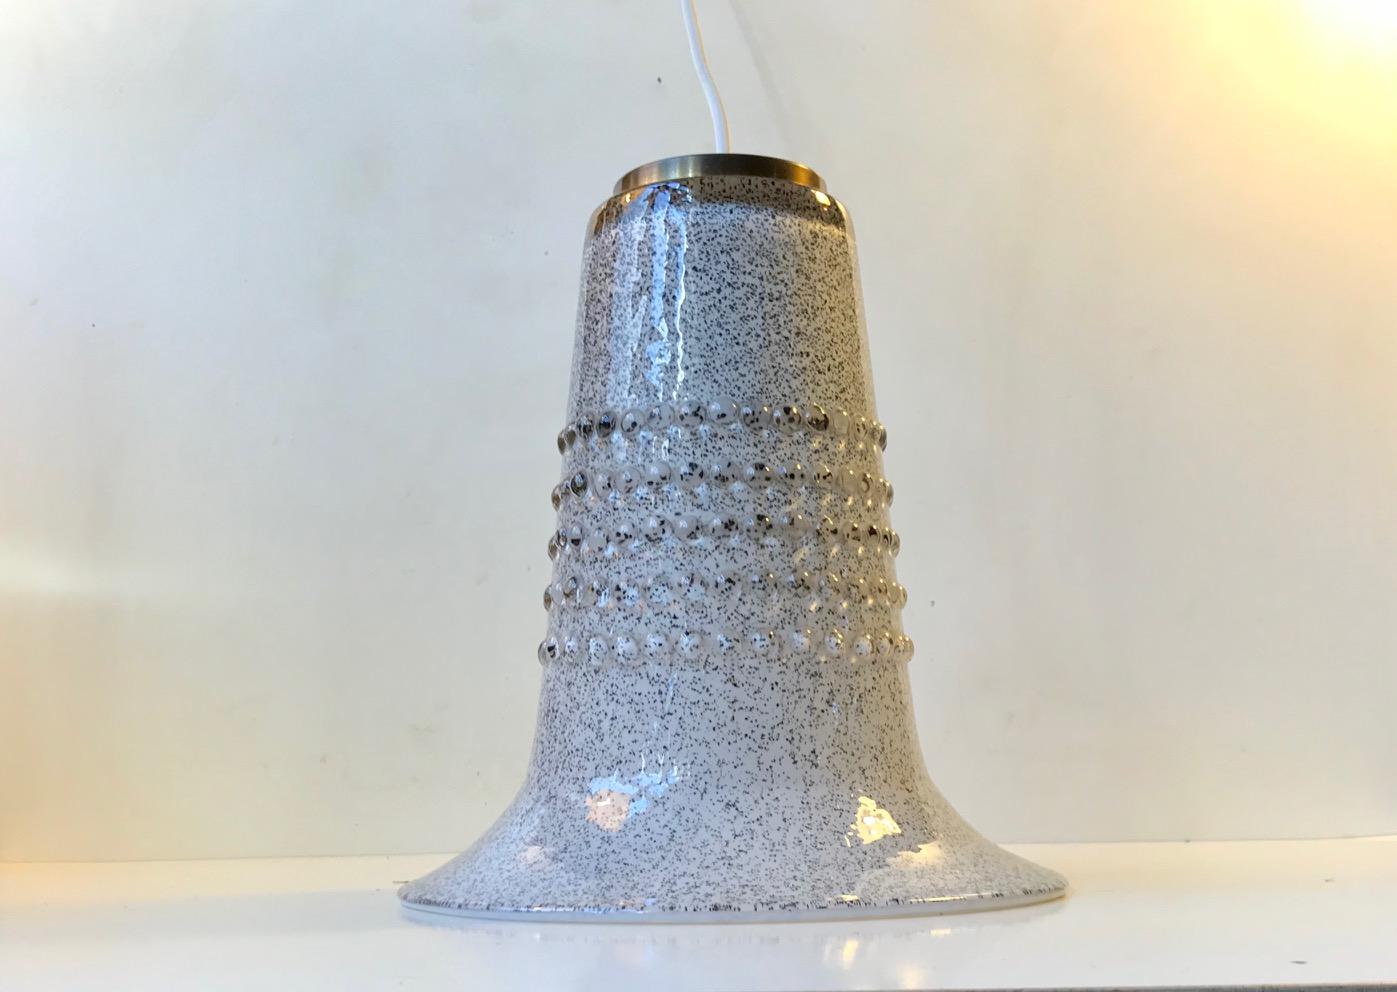 Unique hand blown and bell shaped ceiling lamp designed by Gert Nyström. It was created at Hyllinge Glass Studio in Sweden, circa 1970. It features a speckled black in white exterior with raised glass dots and an all white interior.